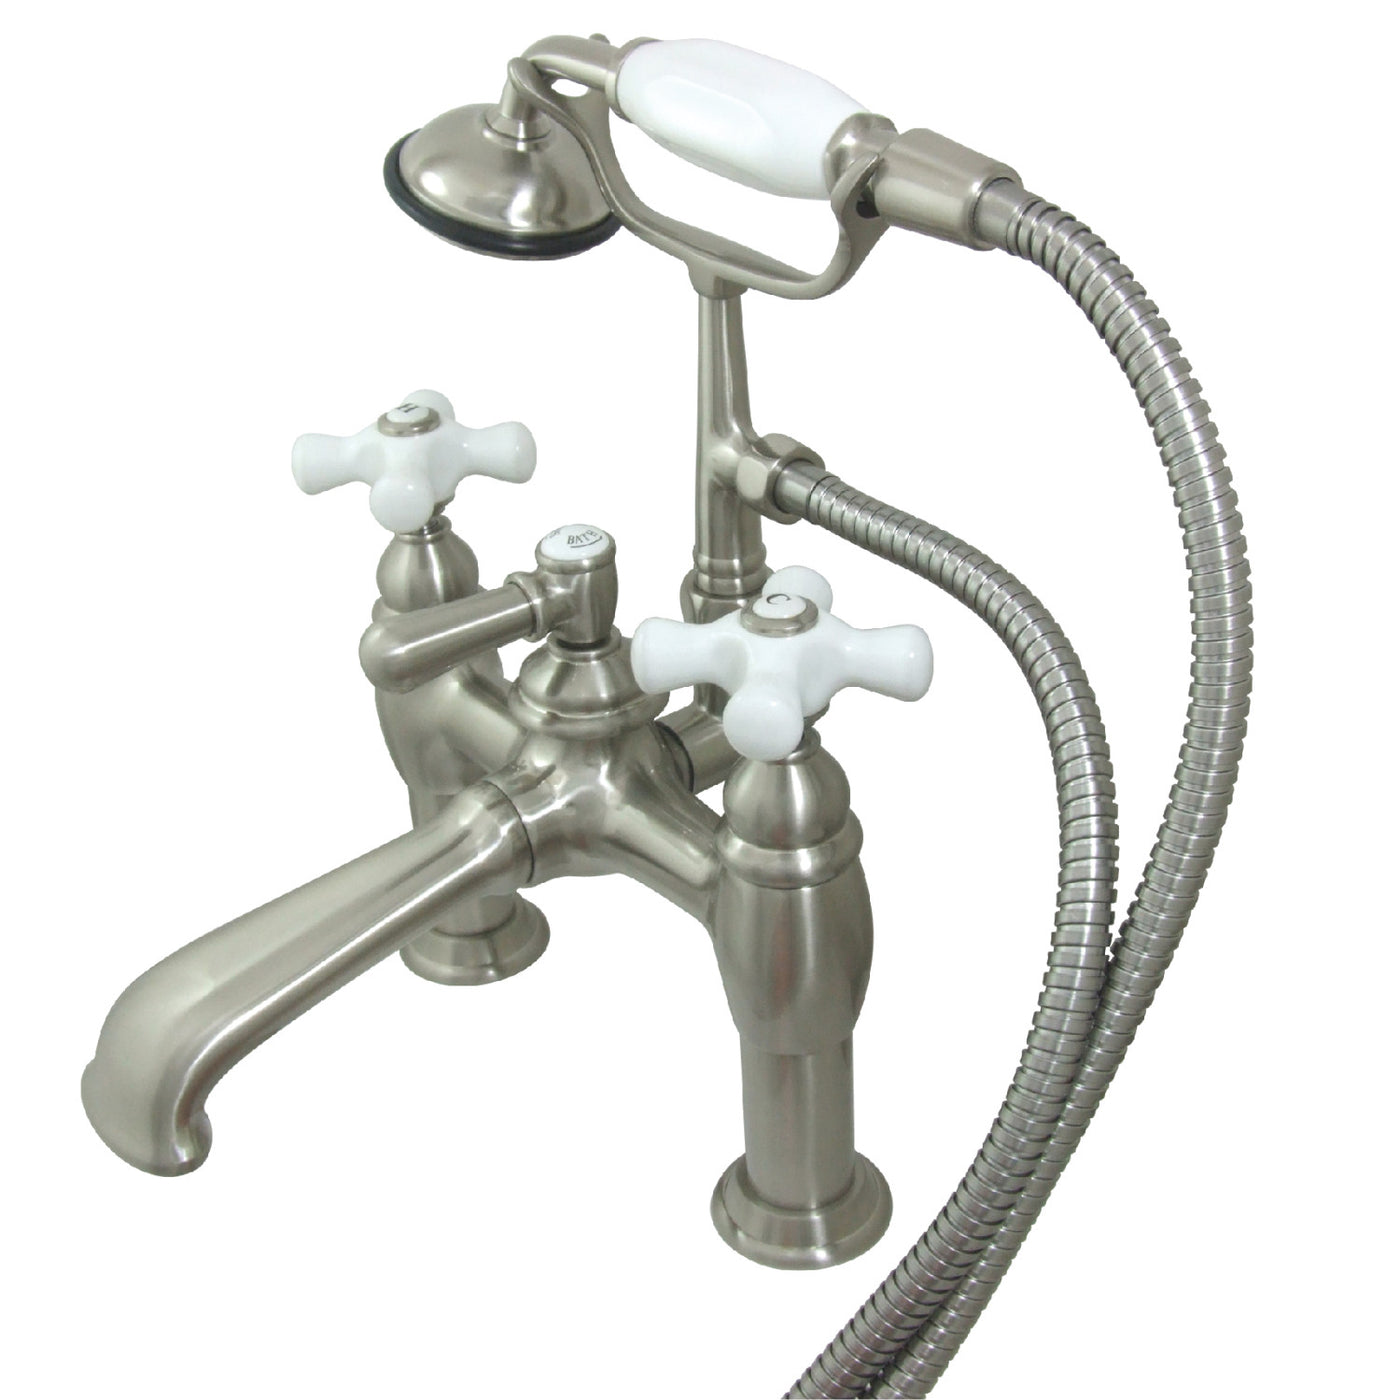 Elements of Design DT6038PX 7-Inch Deck Mount Tub Faucet with Hand Shower, Brushed Nickel